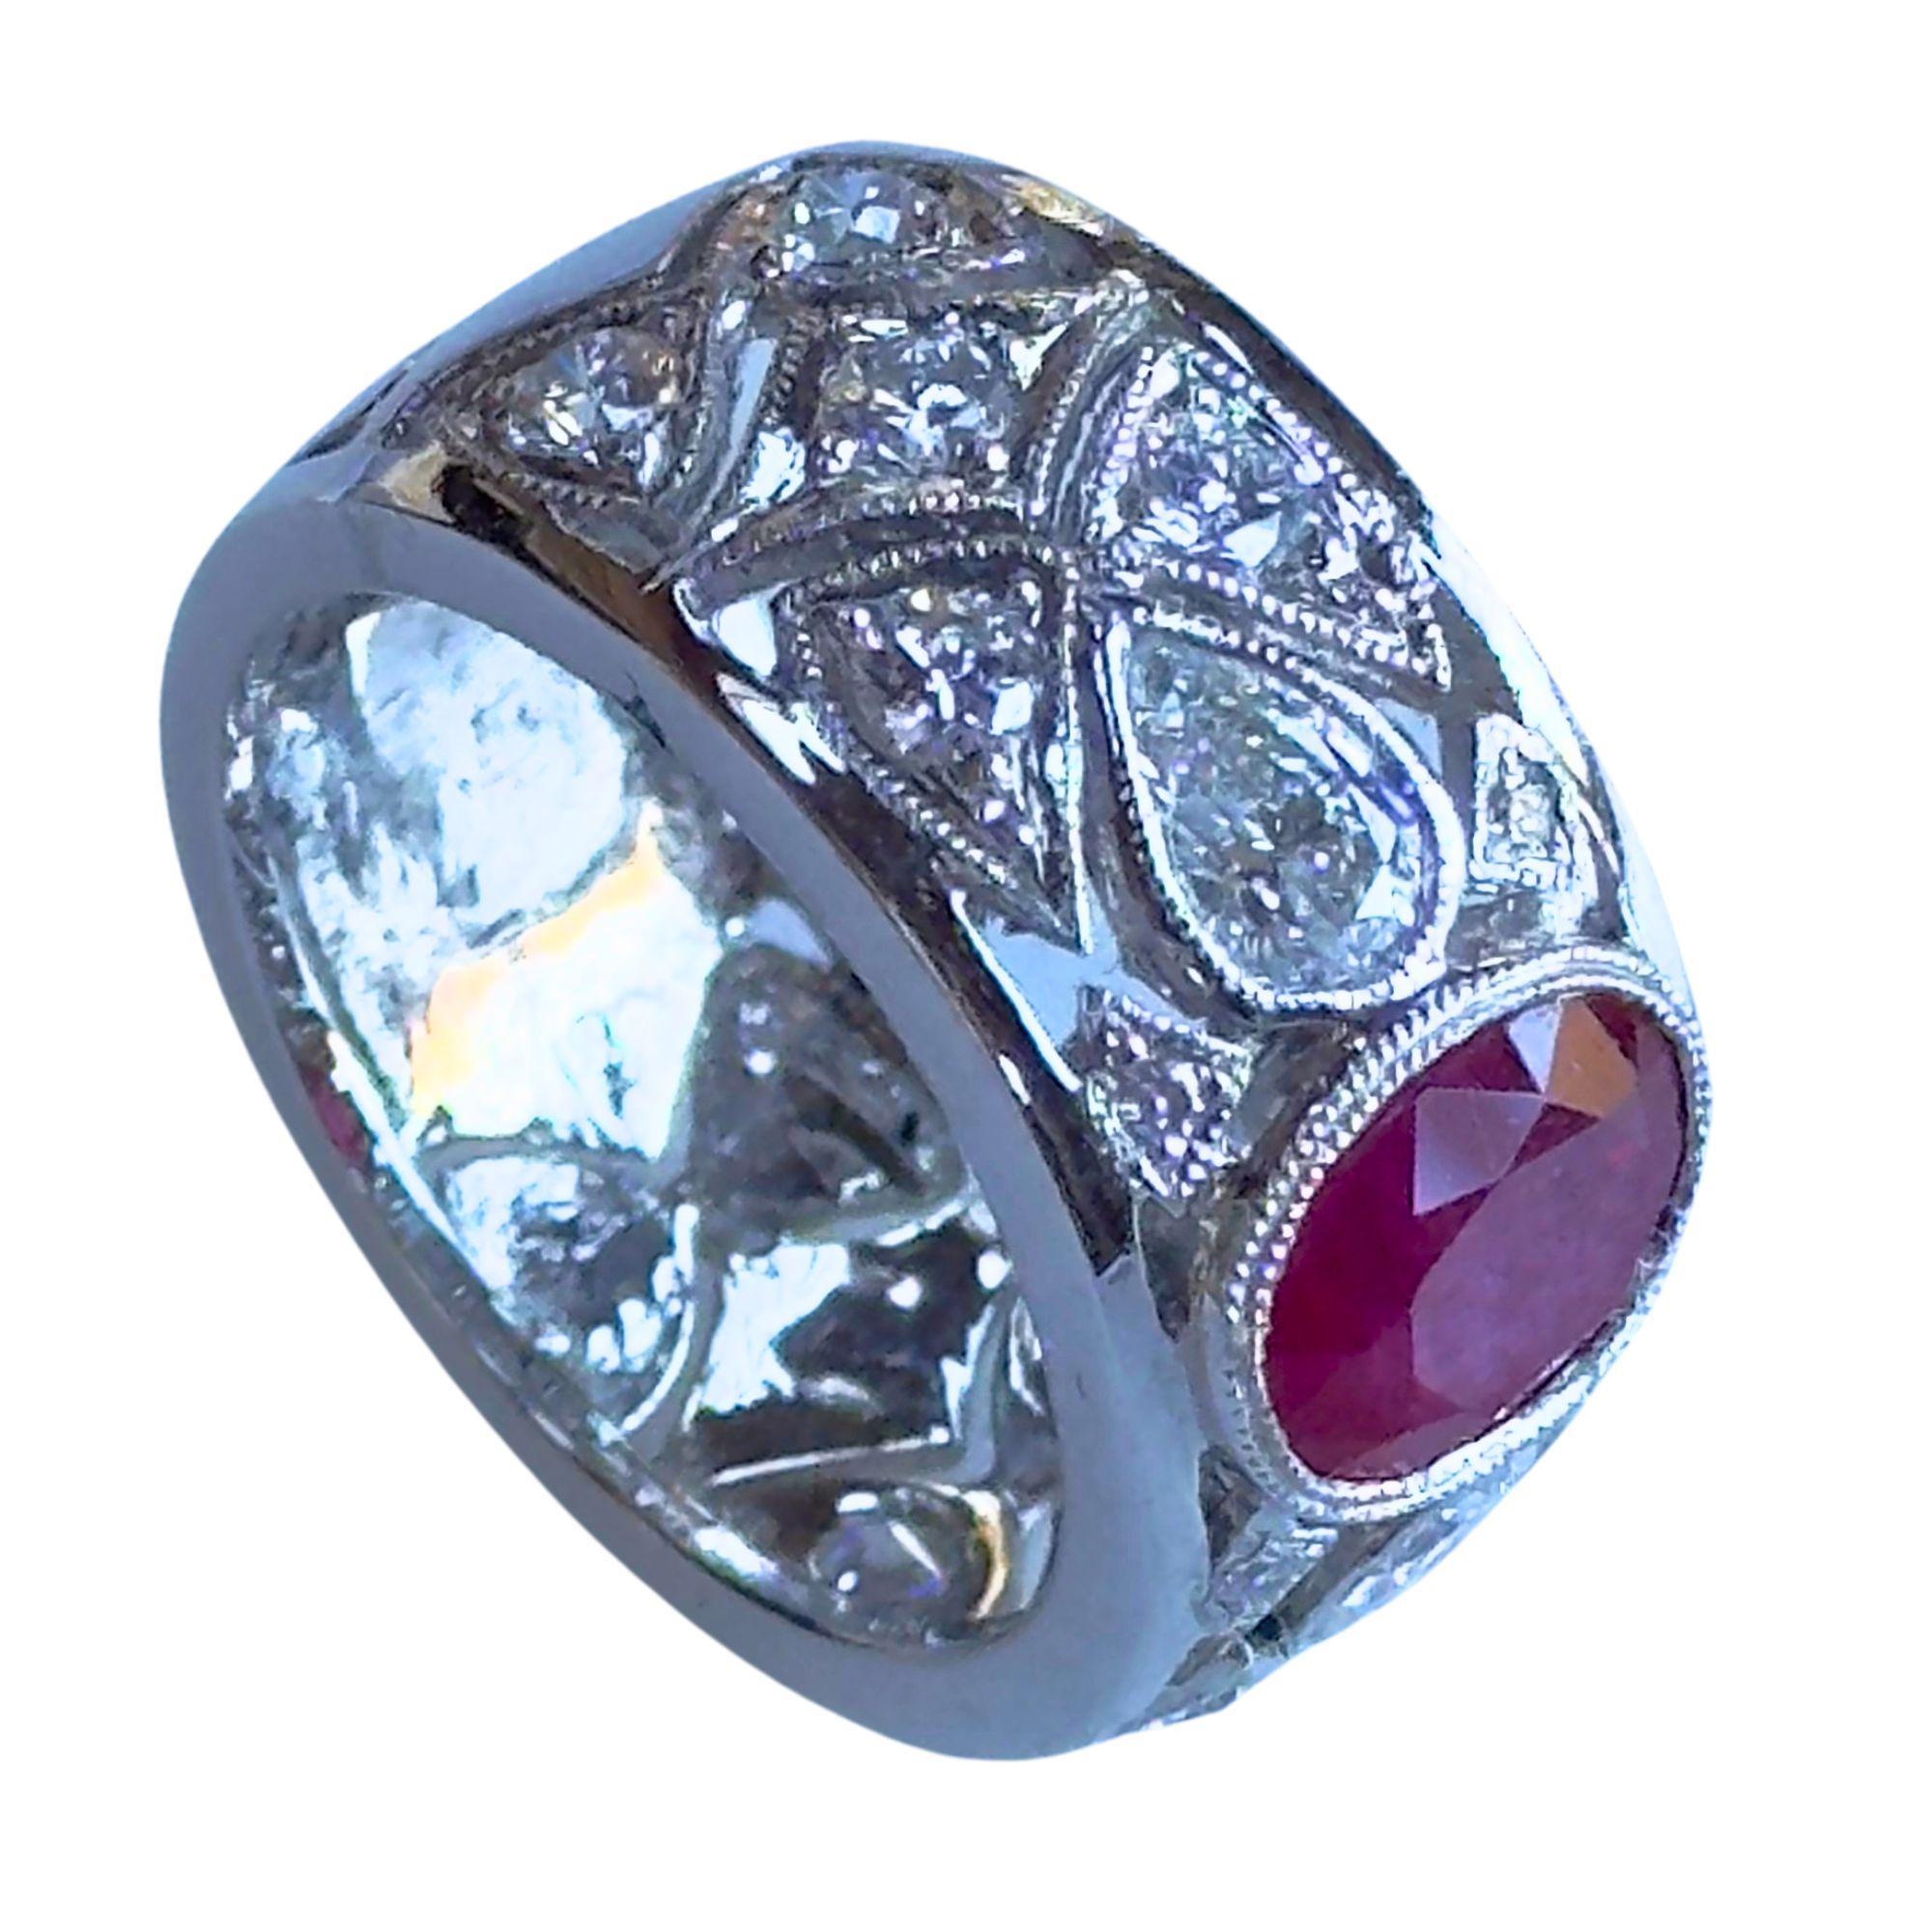 Add a touch of elegance to your jewelry collection with this 18k Diamond and Ruby Wide Band Ring. Crafted in 18k white gold, it features 1.18 carats of sparkling diamonds and 2.04 carat ruby center. In good condition with minor surface wear, it's a